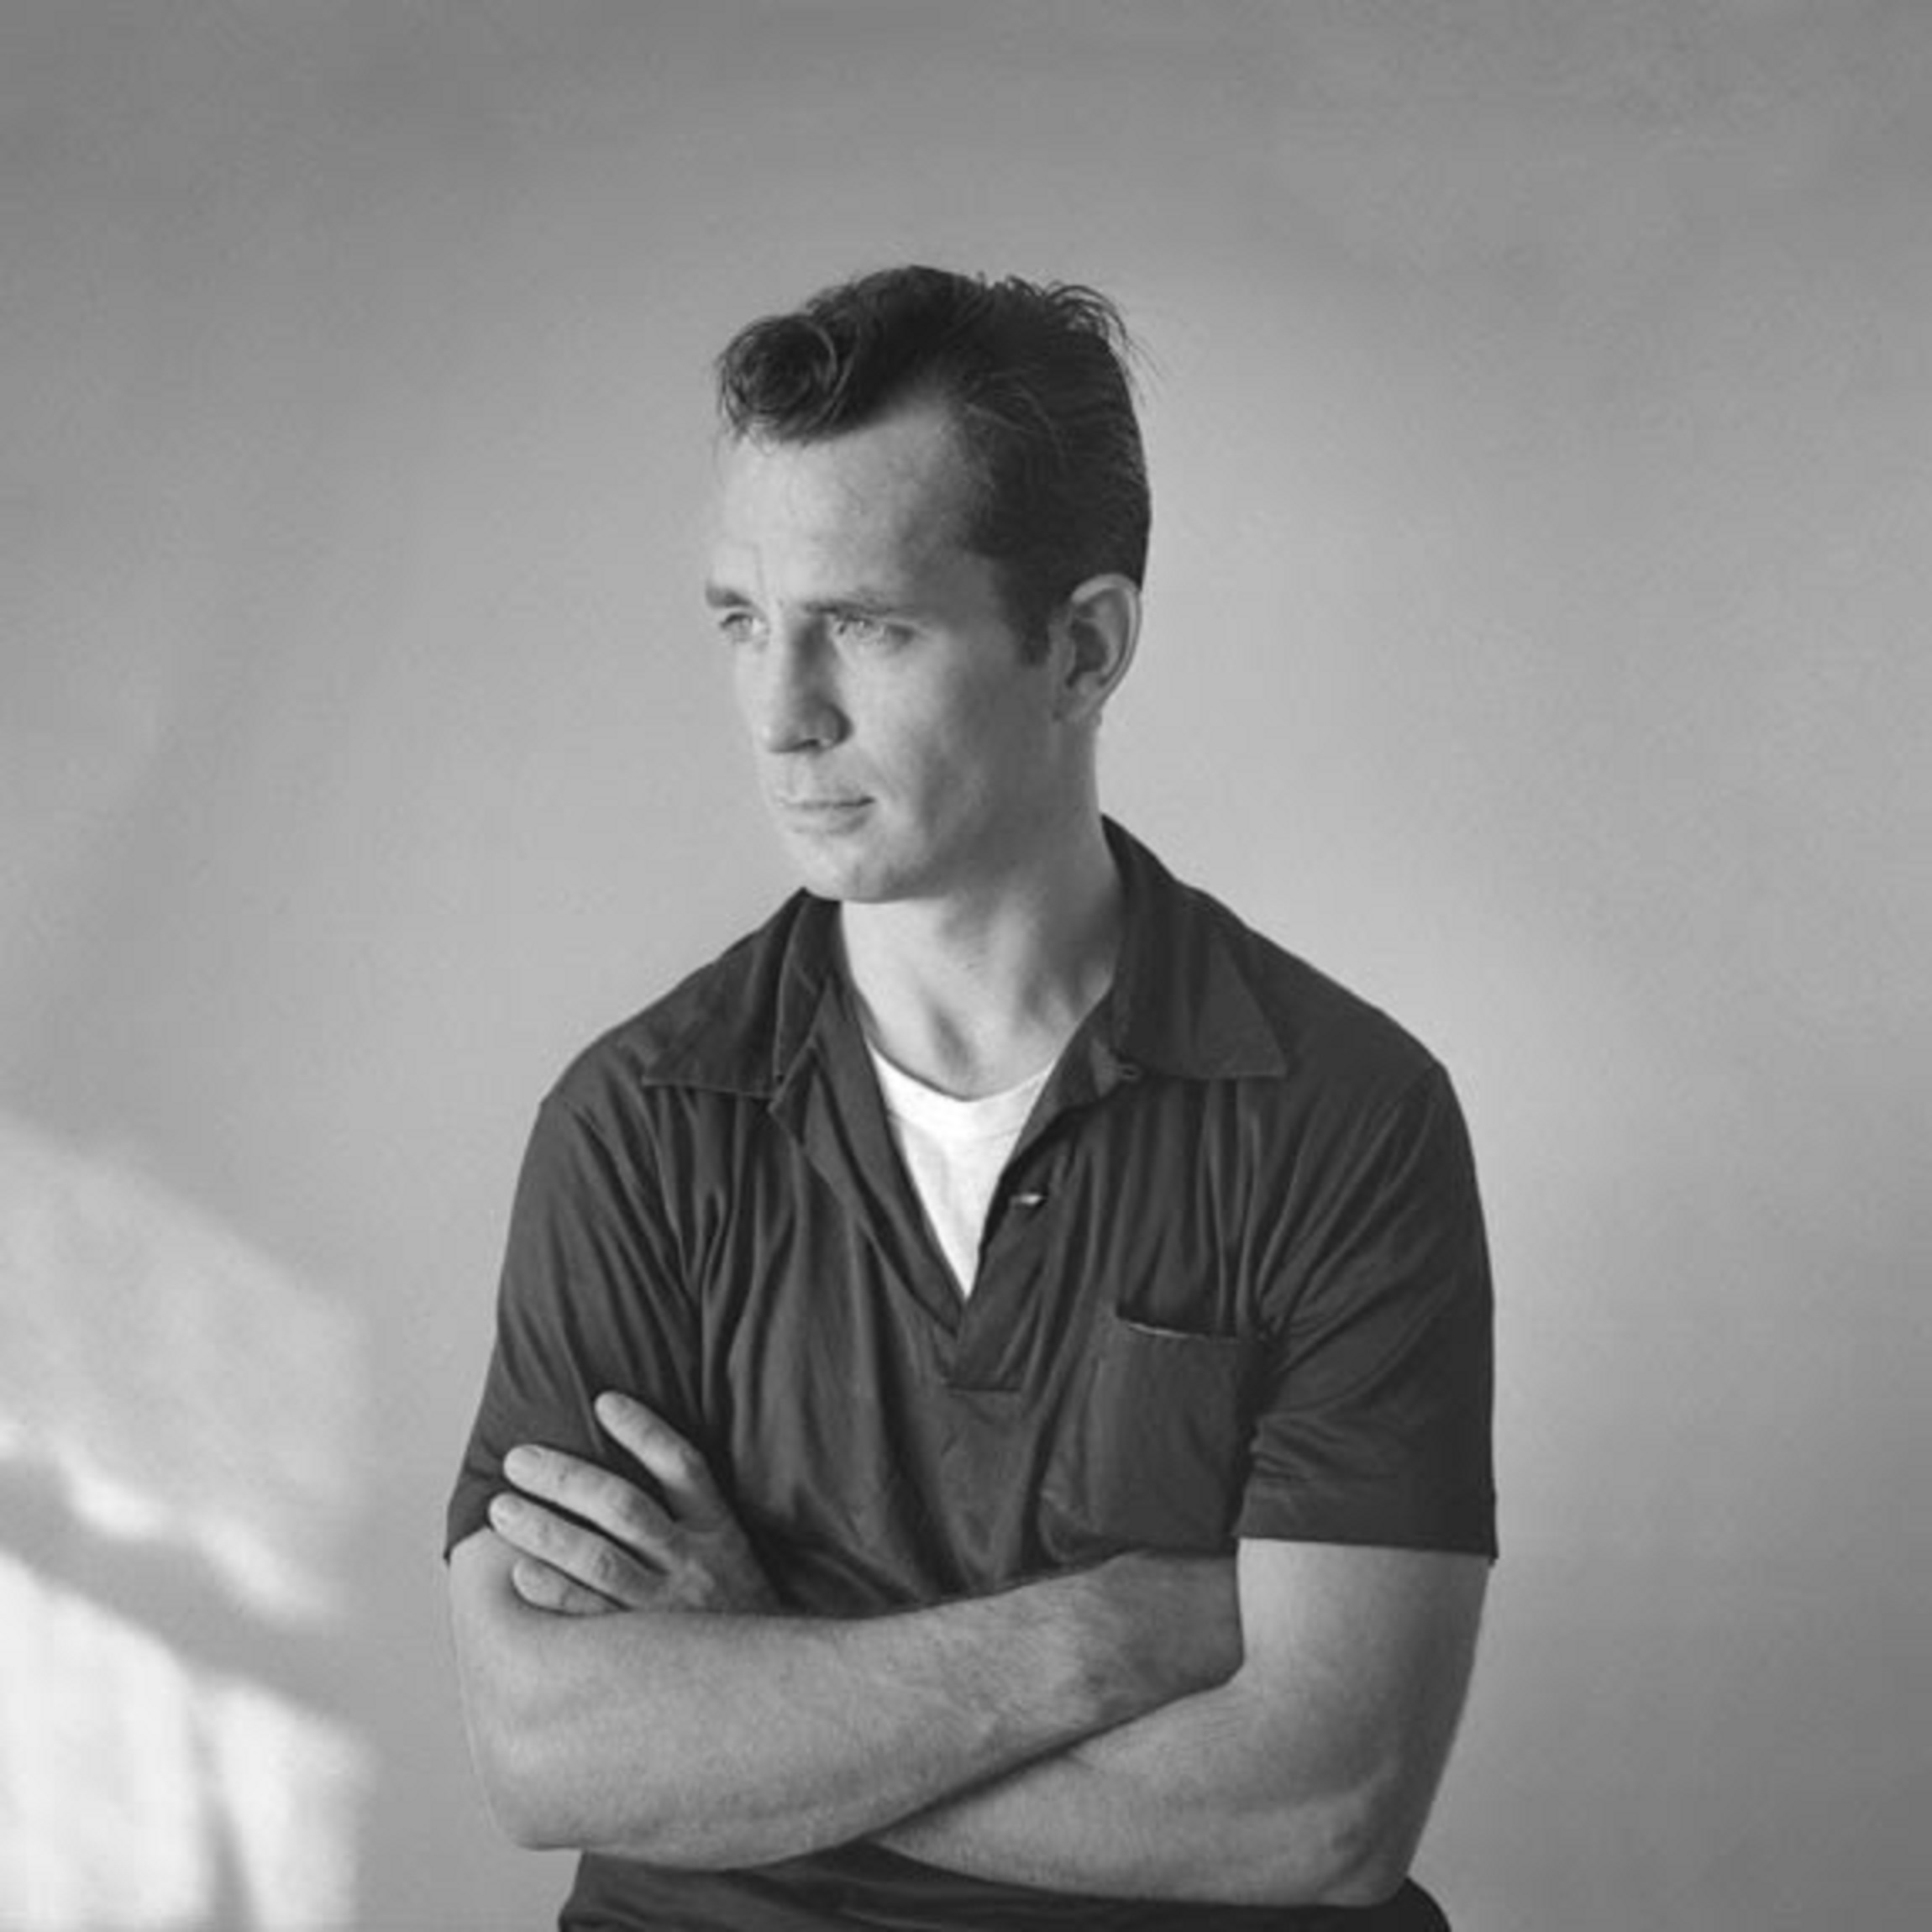 THE JACK KEROUAC ESTATE & Kerouac @ 100 Committee Announce Plans For Centennial Birthday Starting March 2022 In Lowell, MA